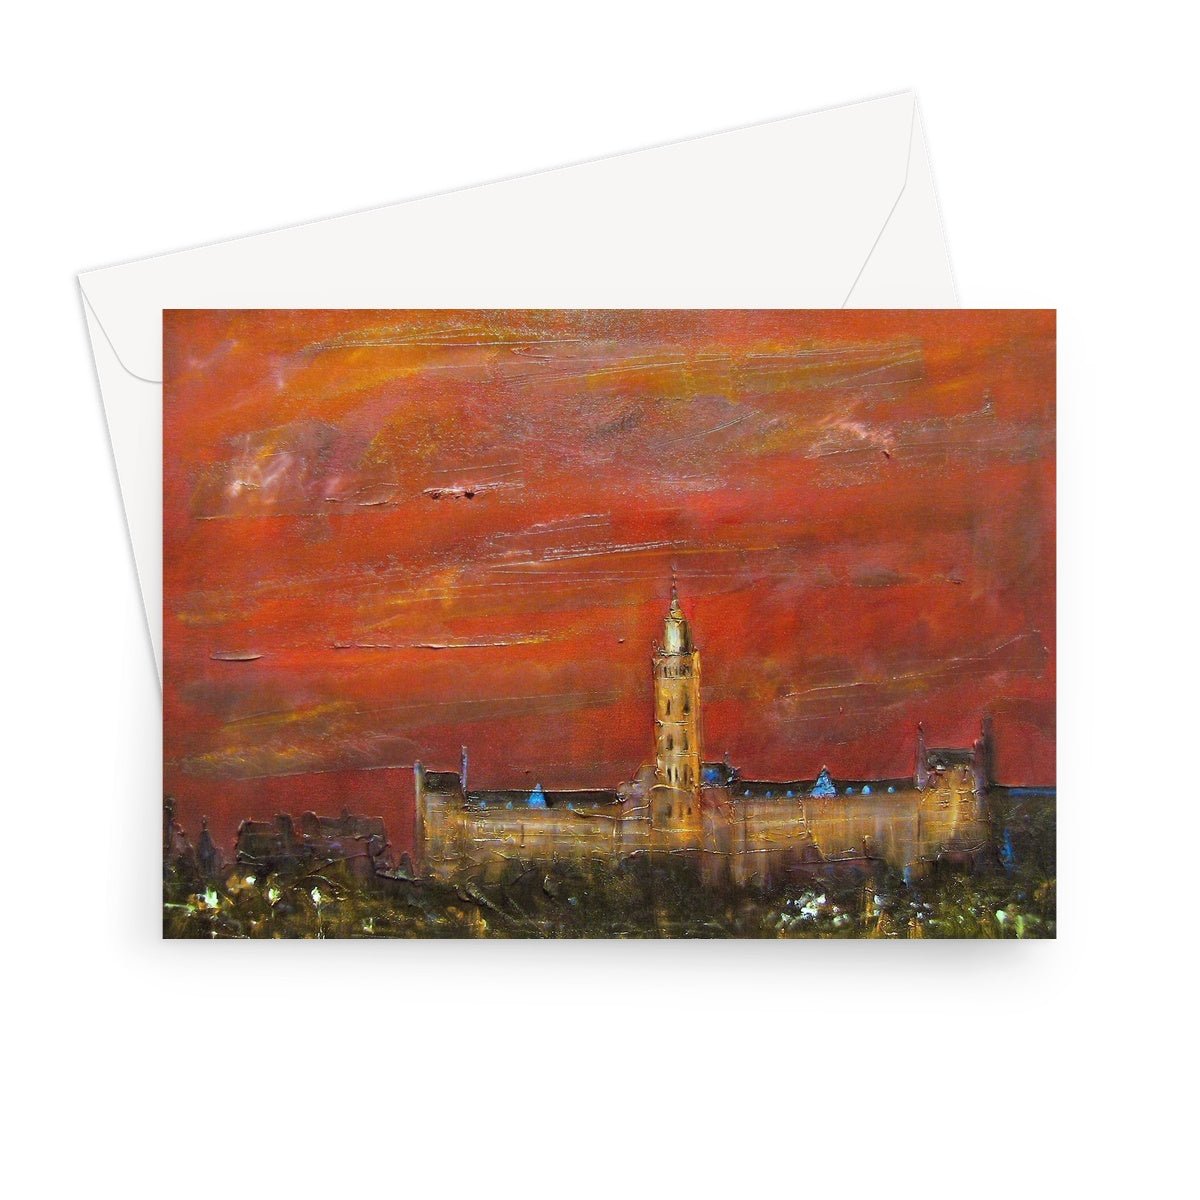 Glasgow University Dusk Art Gifts Greeting Card-Greetings Cards-Edinburgh & Glasgow Art Gallery-7"x5"-10 Cards-Paintings, Prints, Homeware, Art Gifts From Scotland By Scottish Artist Kevin Hunter